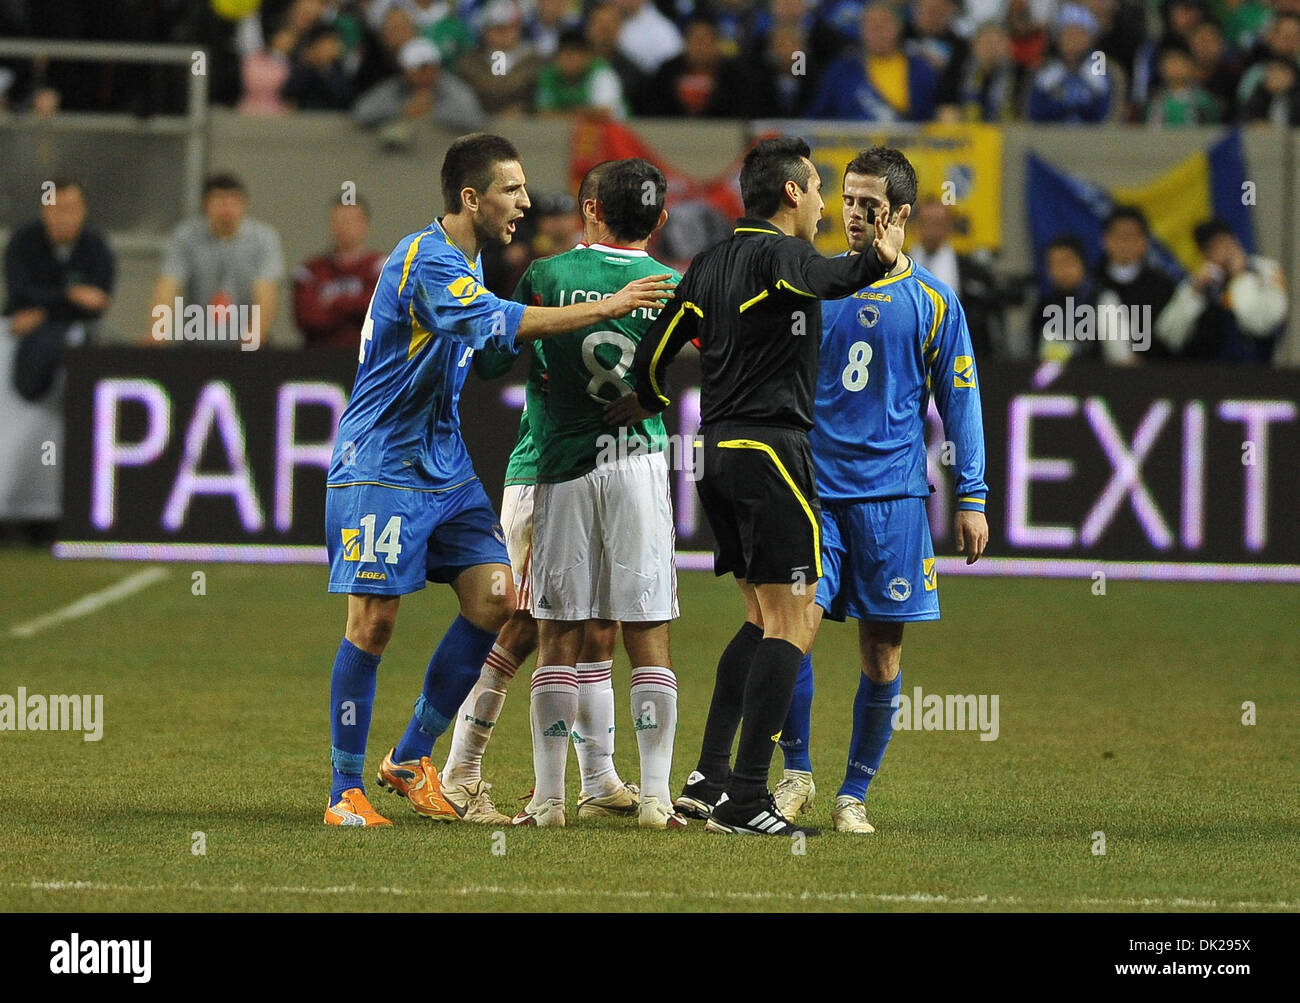 Feb. 9, 2011 - Atlanta, Georgia, United States of America - Referee Jair Marrufo tries to make the call as Bosnia-Herzegovina's Forward Vedad Ibisevic (#14) and Bosnia-Herzegovina's Midfielder Miralem Pjanic (#8) protest during Soccer action between Bosnia-Herzegovina and Mexico.  Mexico defeated Bosnia-Herzegovina 2-0 in the game at the Georgia Dome in Atlanta, GA. (Credit Image:  Stock Photo